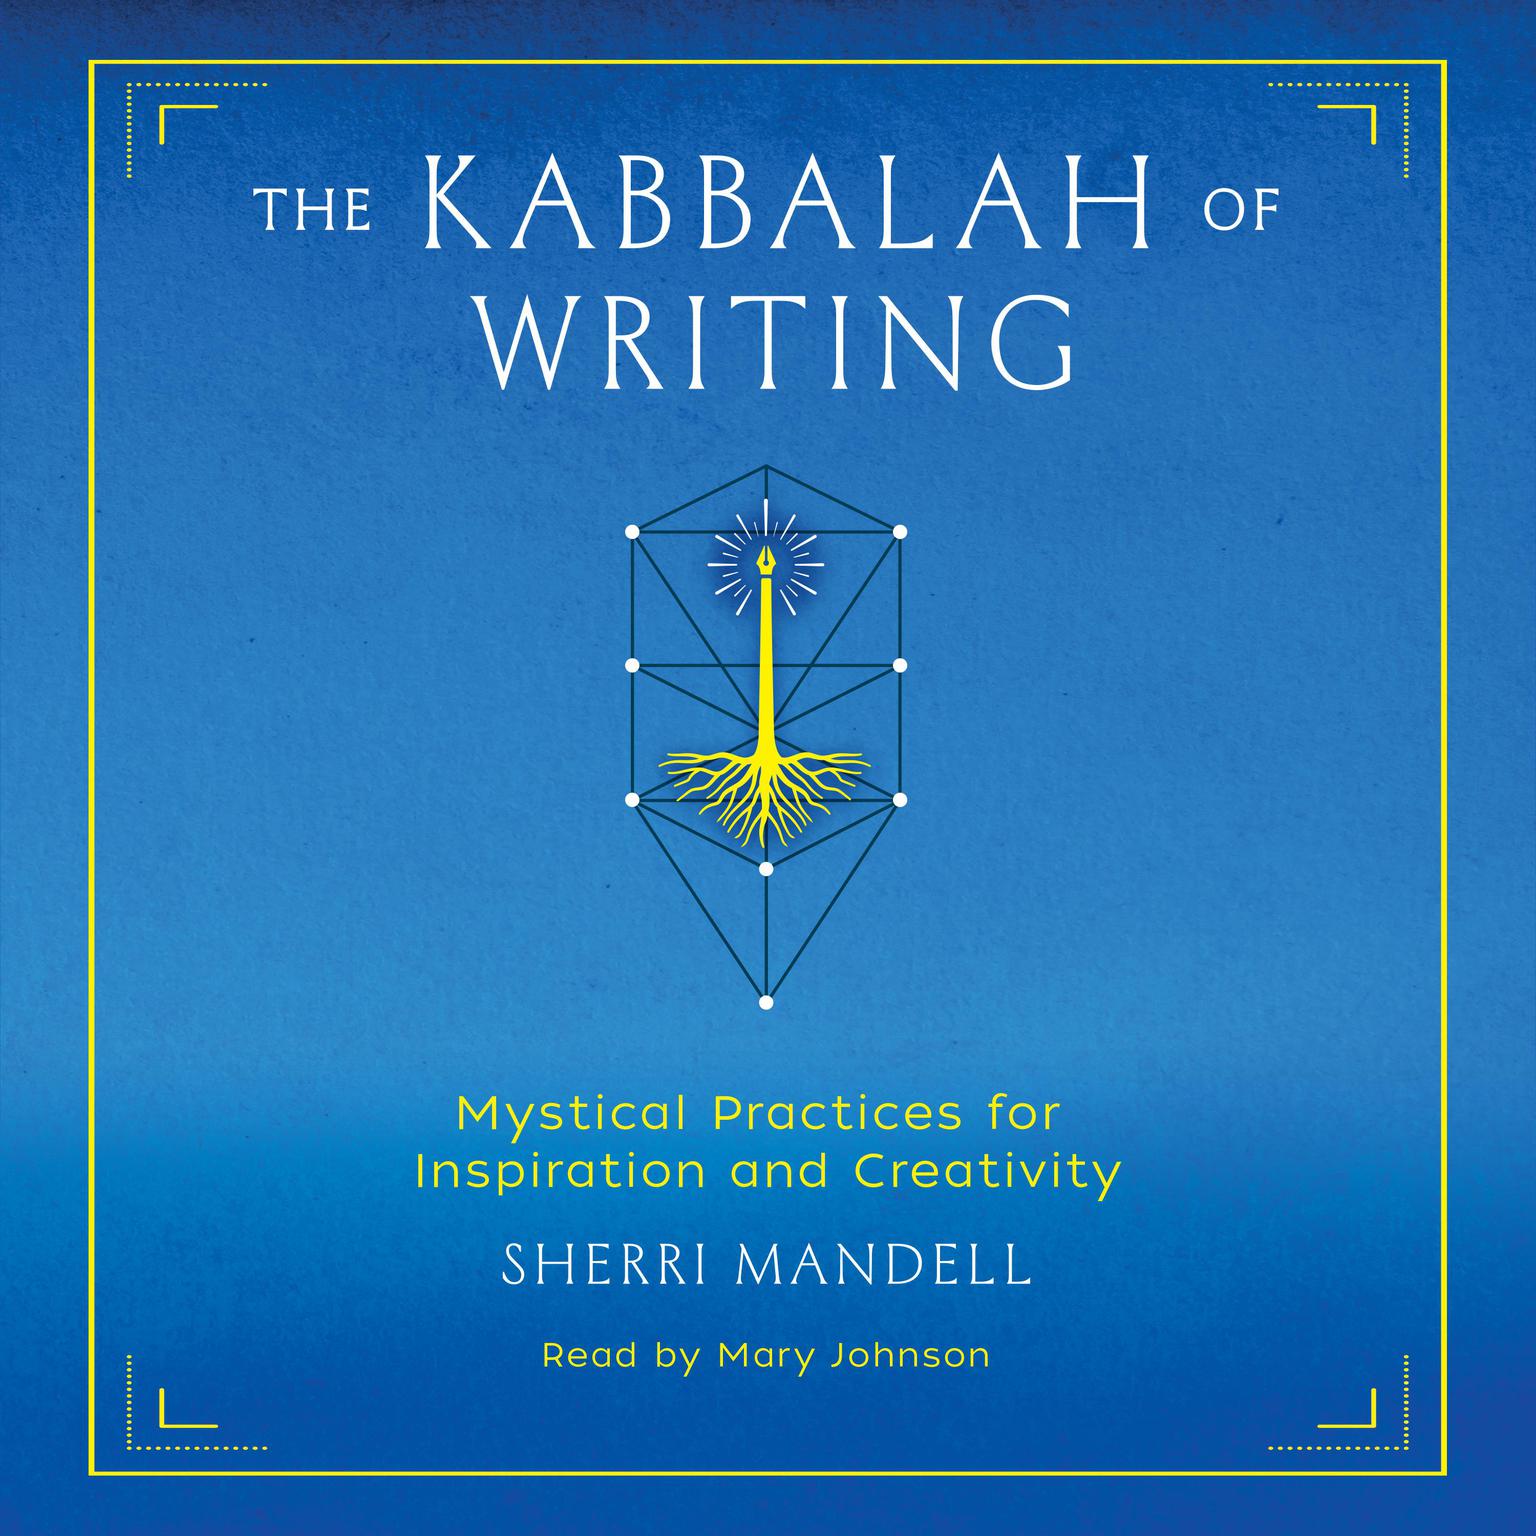 The Kabbalah of Writing: Mystical Practices for Inspiration and Creativity Audiobook, by Sherri Mandell